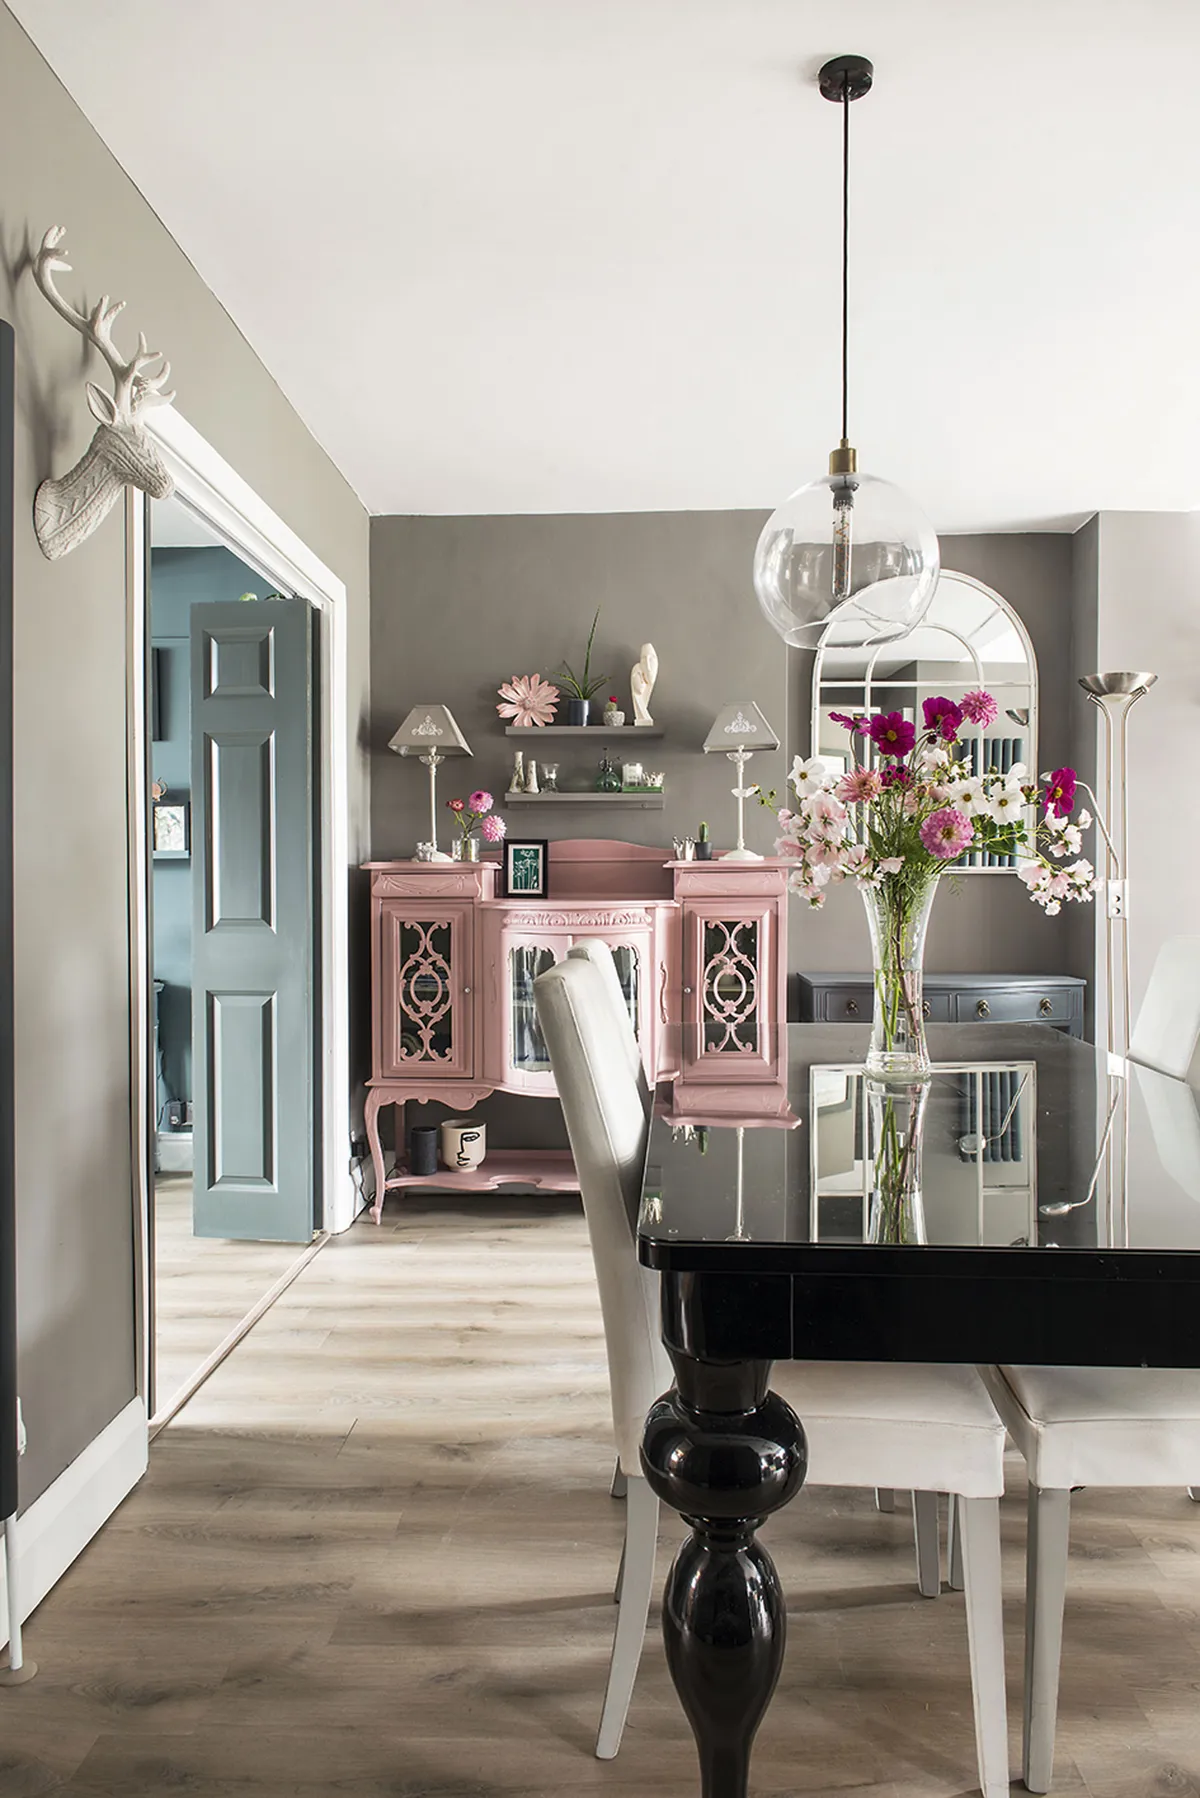 To keep costs down, Sarah designed her scheme around furniture she already owned. She brought the black table, won on eBay, and grey Next chairs, from her previous home and painted an existing cabinet in Farrow & Ball’s Sulking Room Pink to tie in with the island